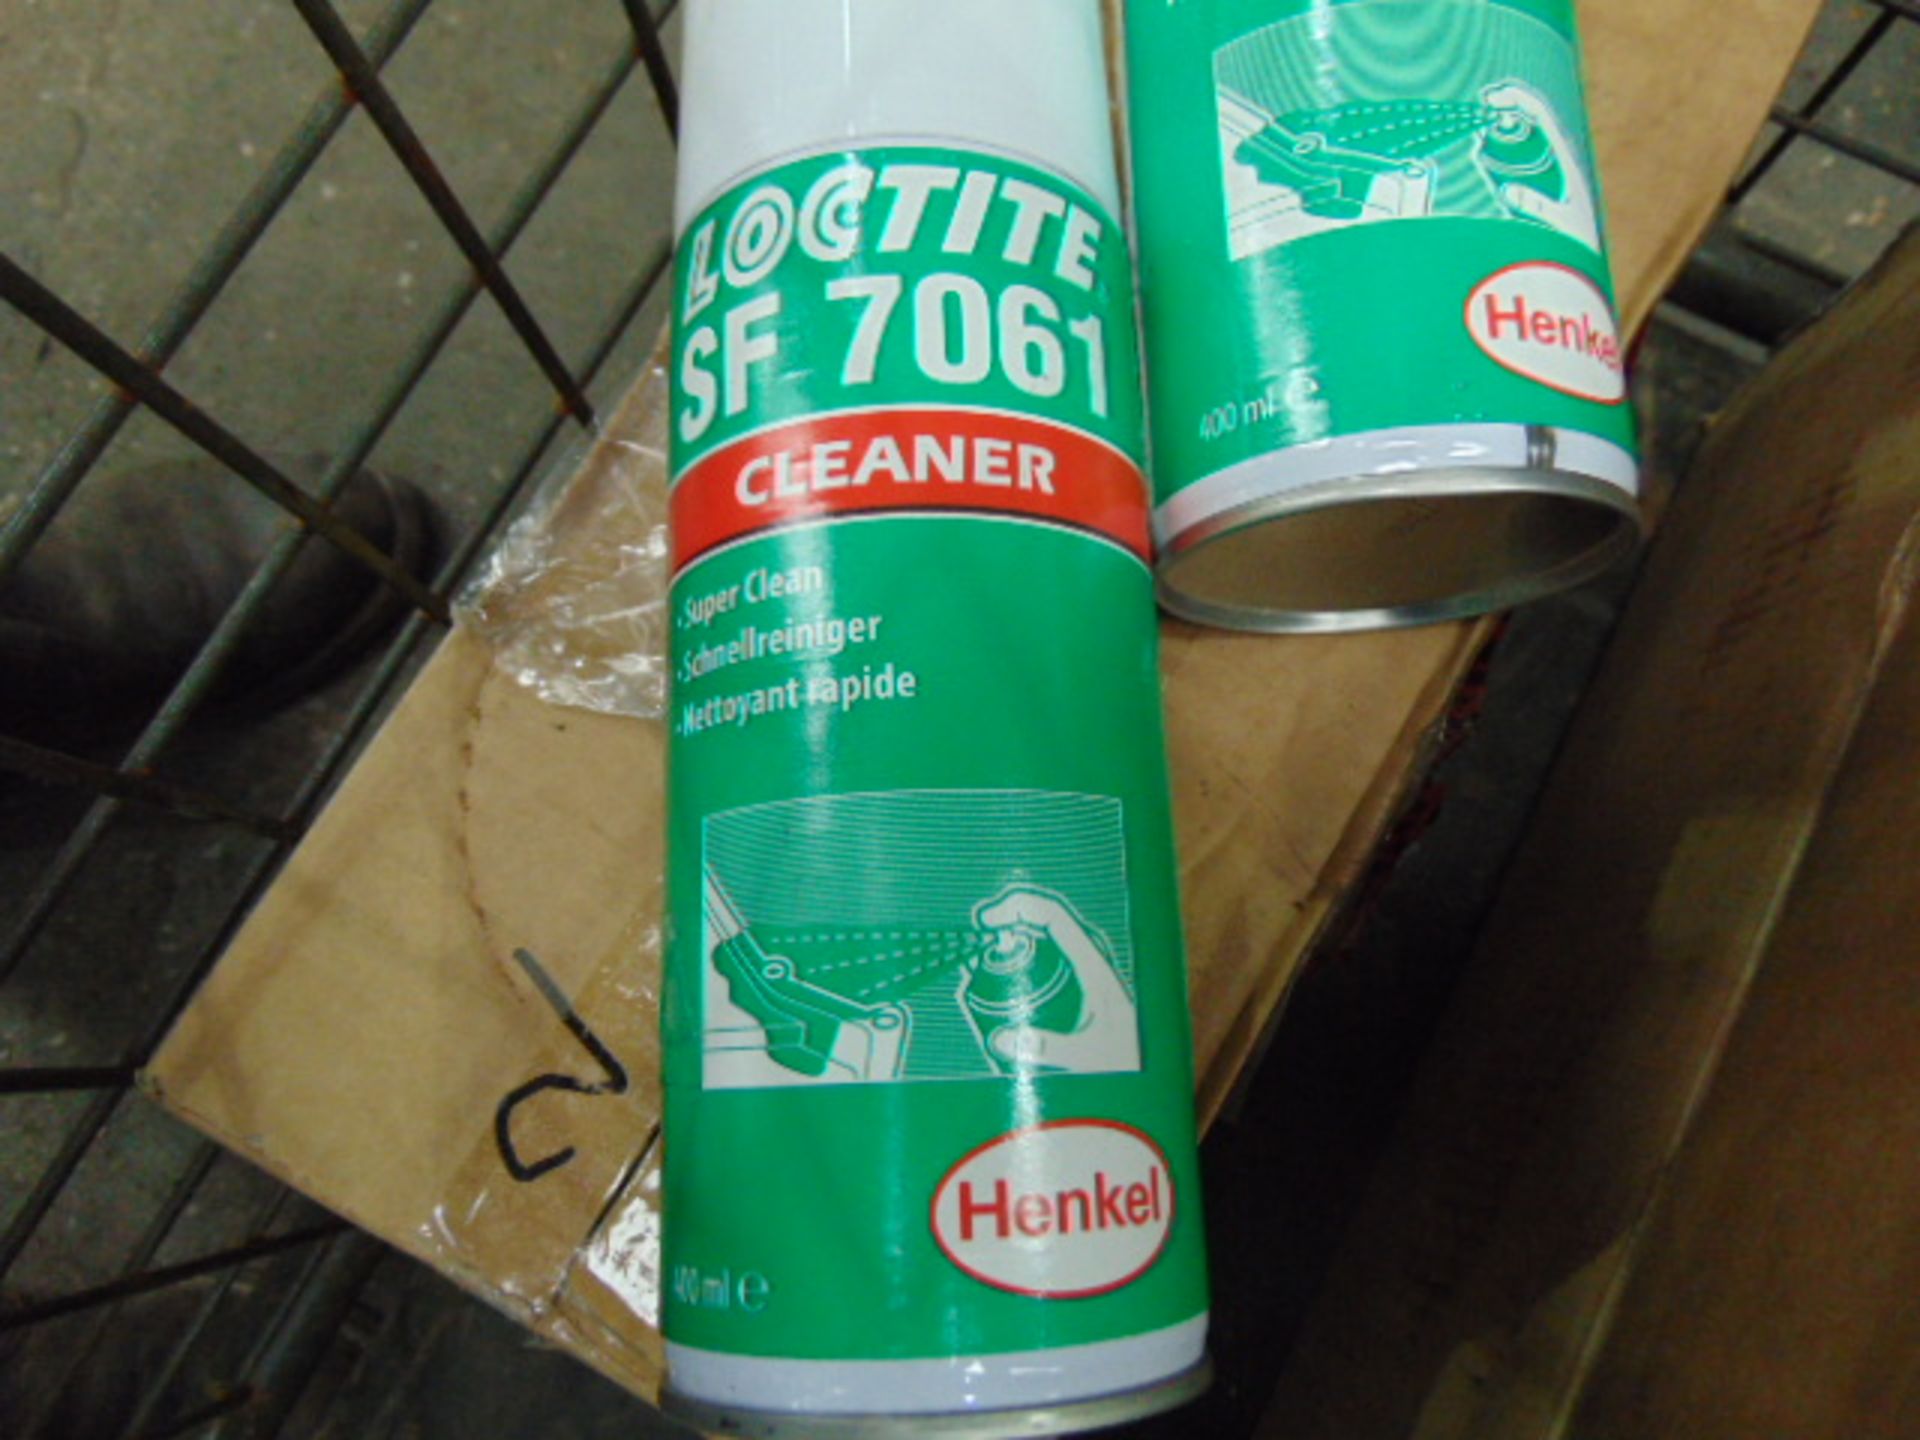 12 x Unissued 400ml Cans of Loctite SF7061 Multi Purpose Cleaner - Image 2 of 2